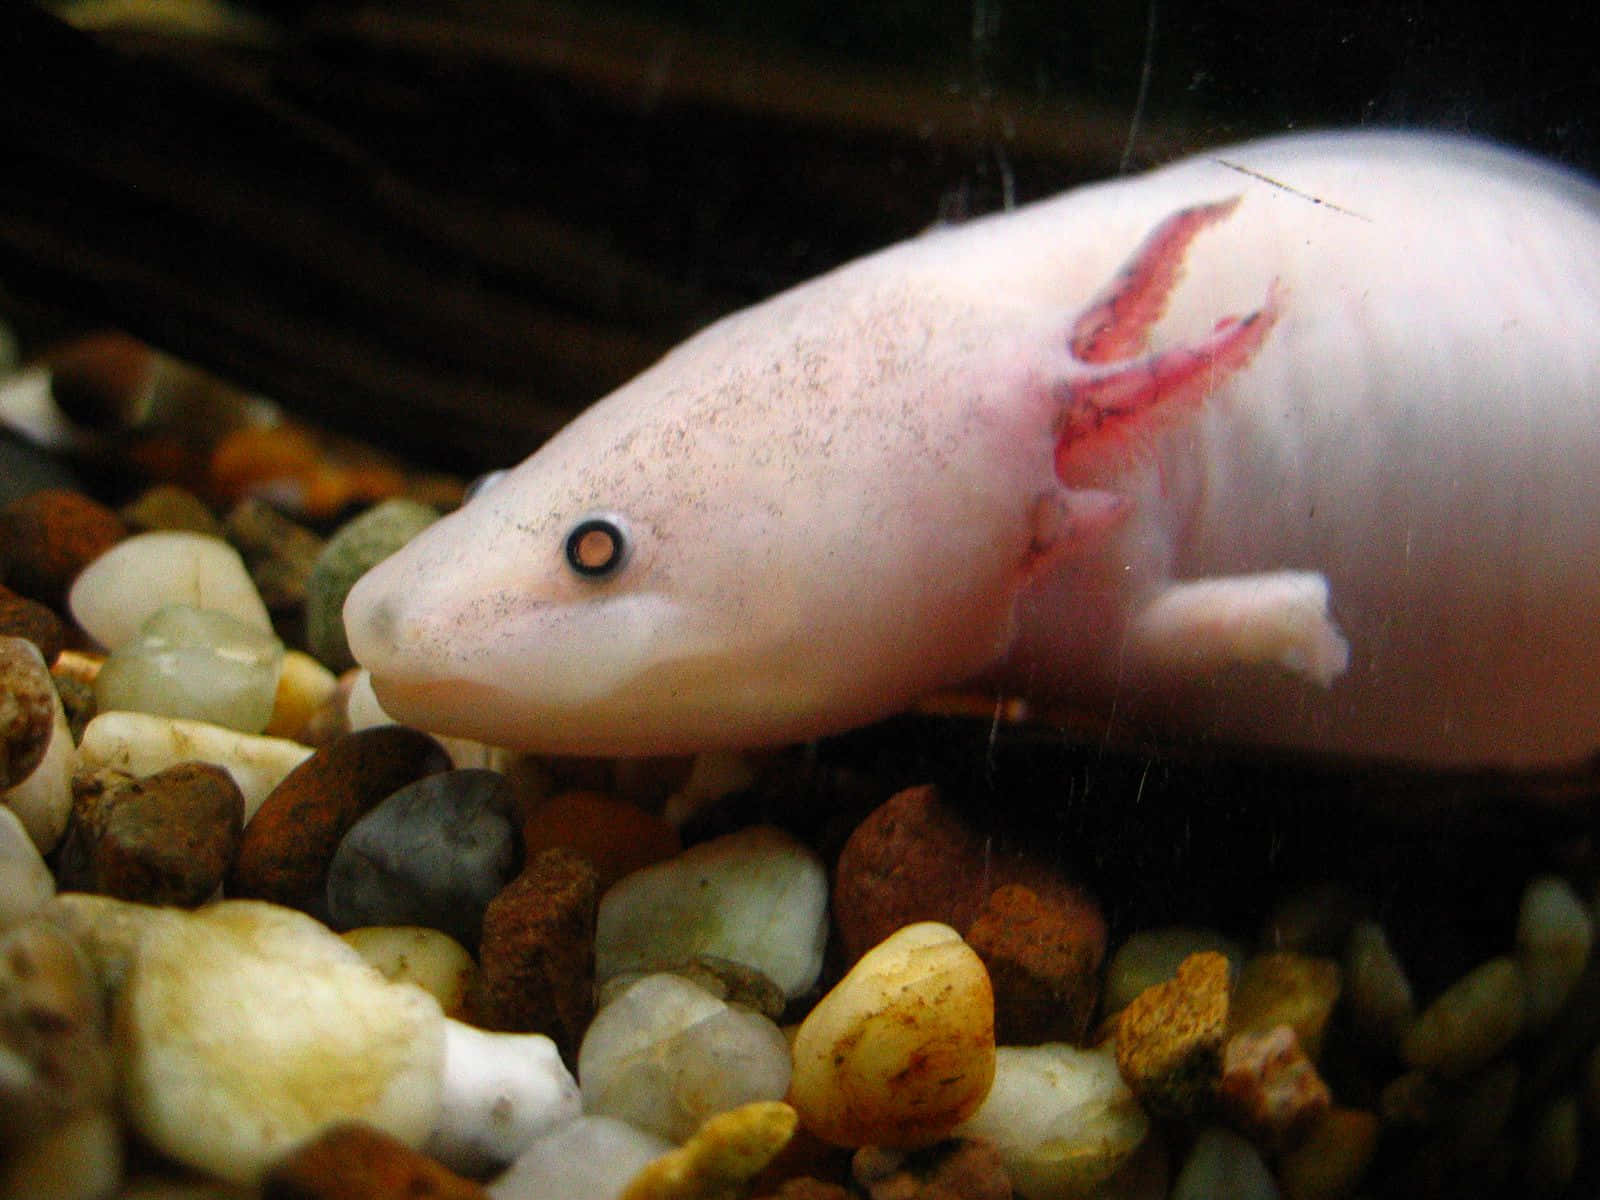 A beautiful axolotl perched on a rock in its natural environment